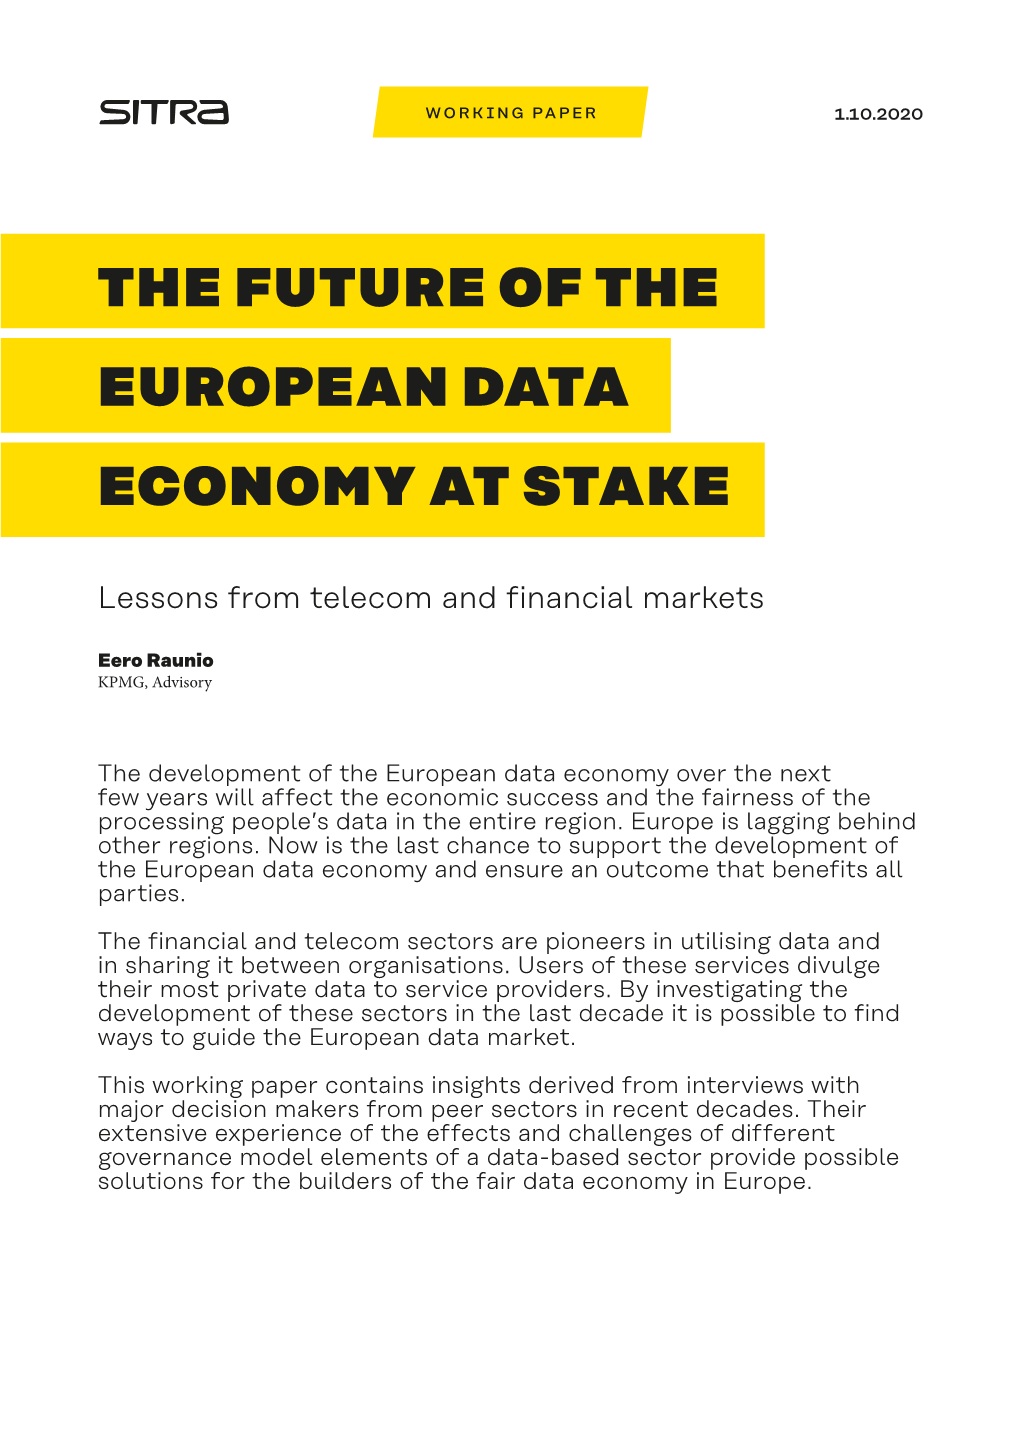 The Future of the European Data Economy at Stake. Lessons